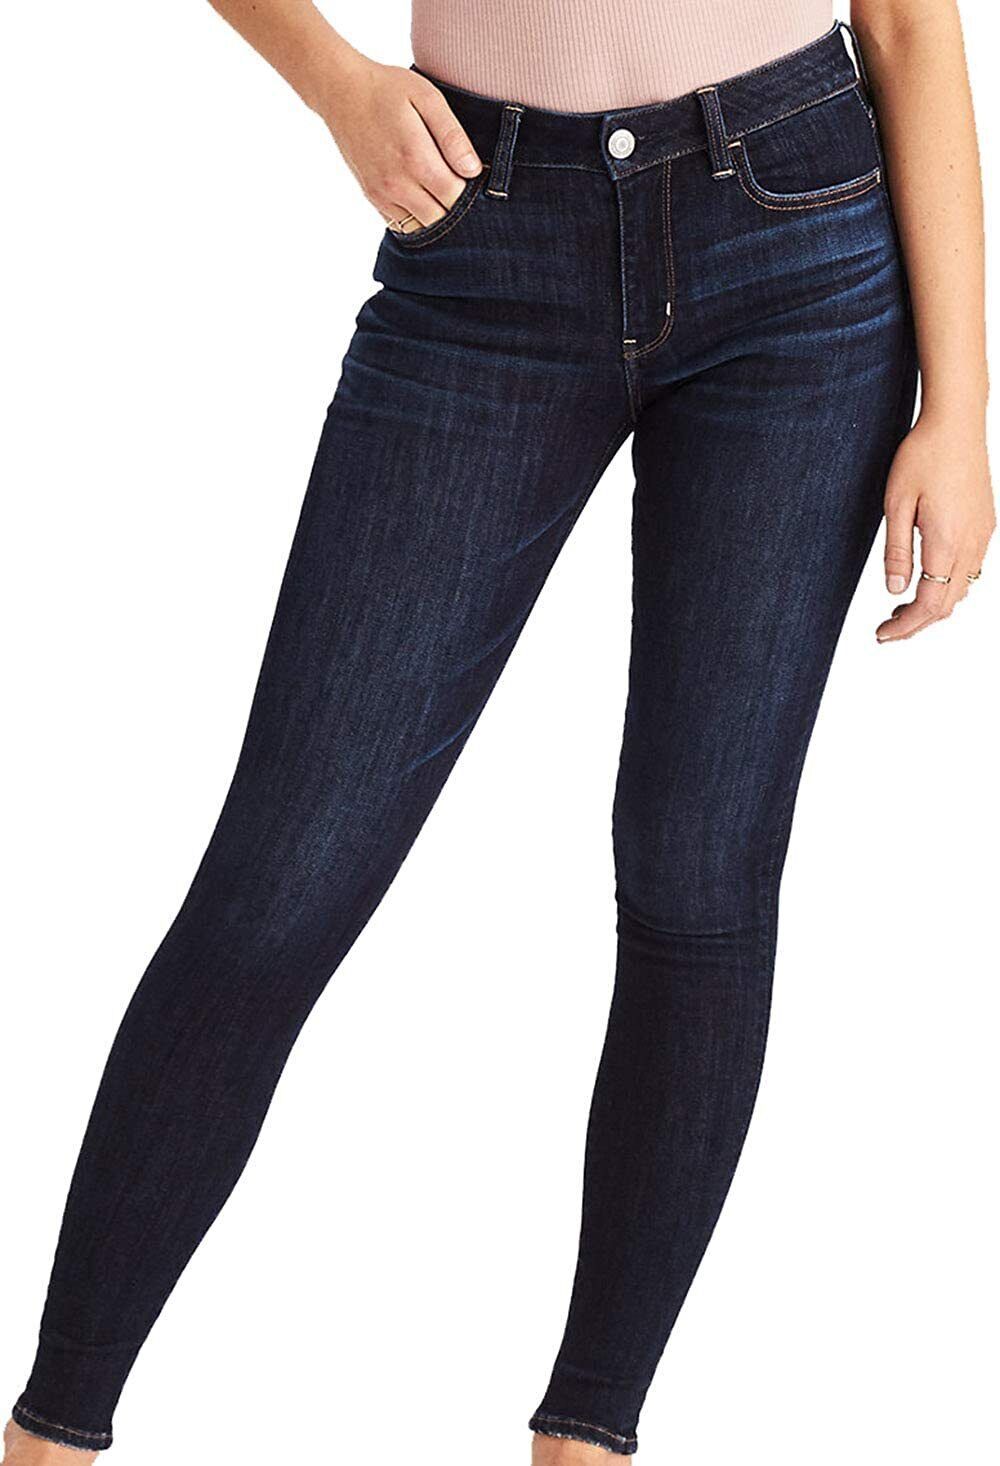 Primary image for American Eagle Womens Stretch High-Waisted Jegging Jeans, Blue, 00 Reg 6579-4